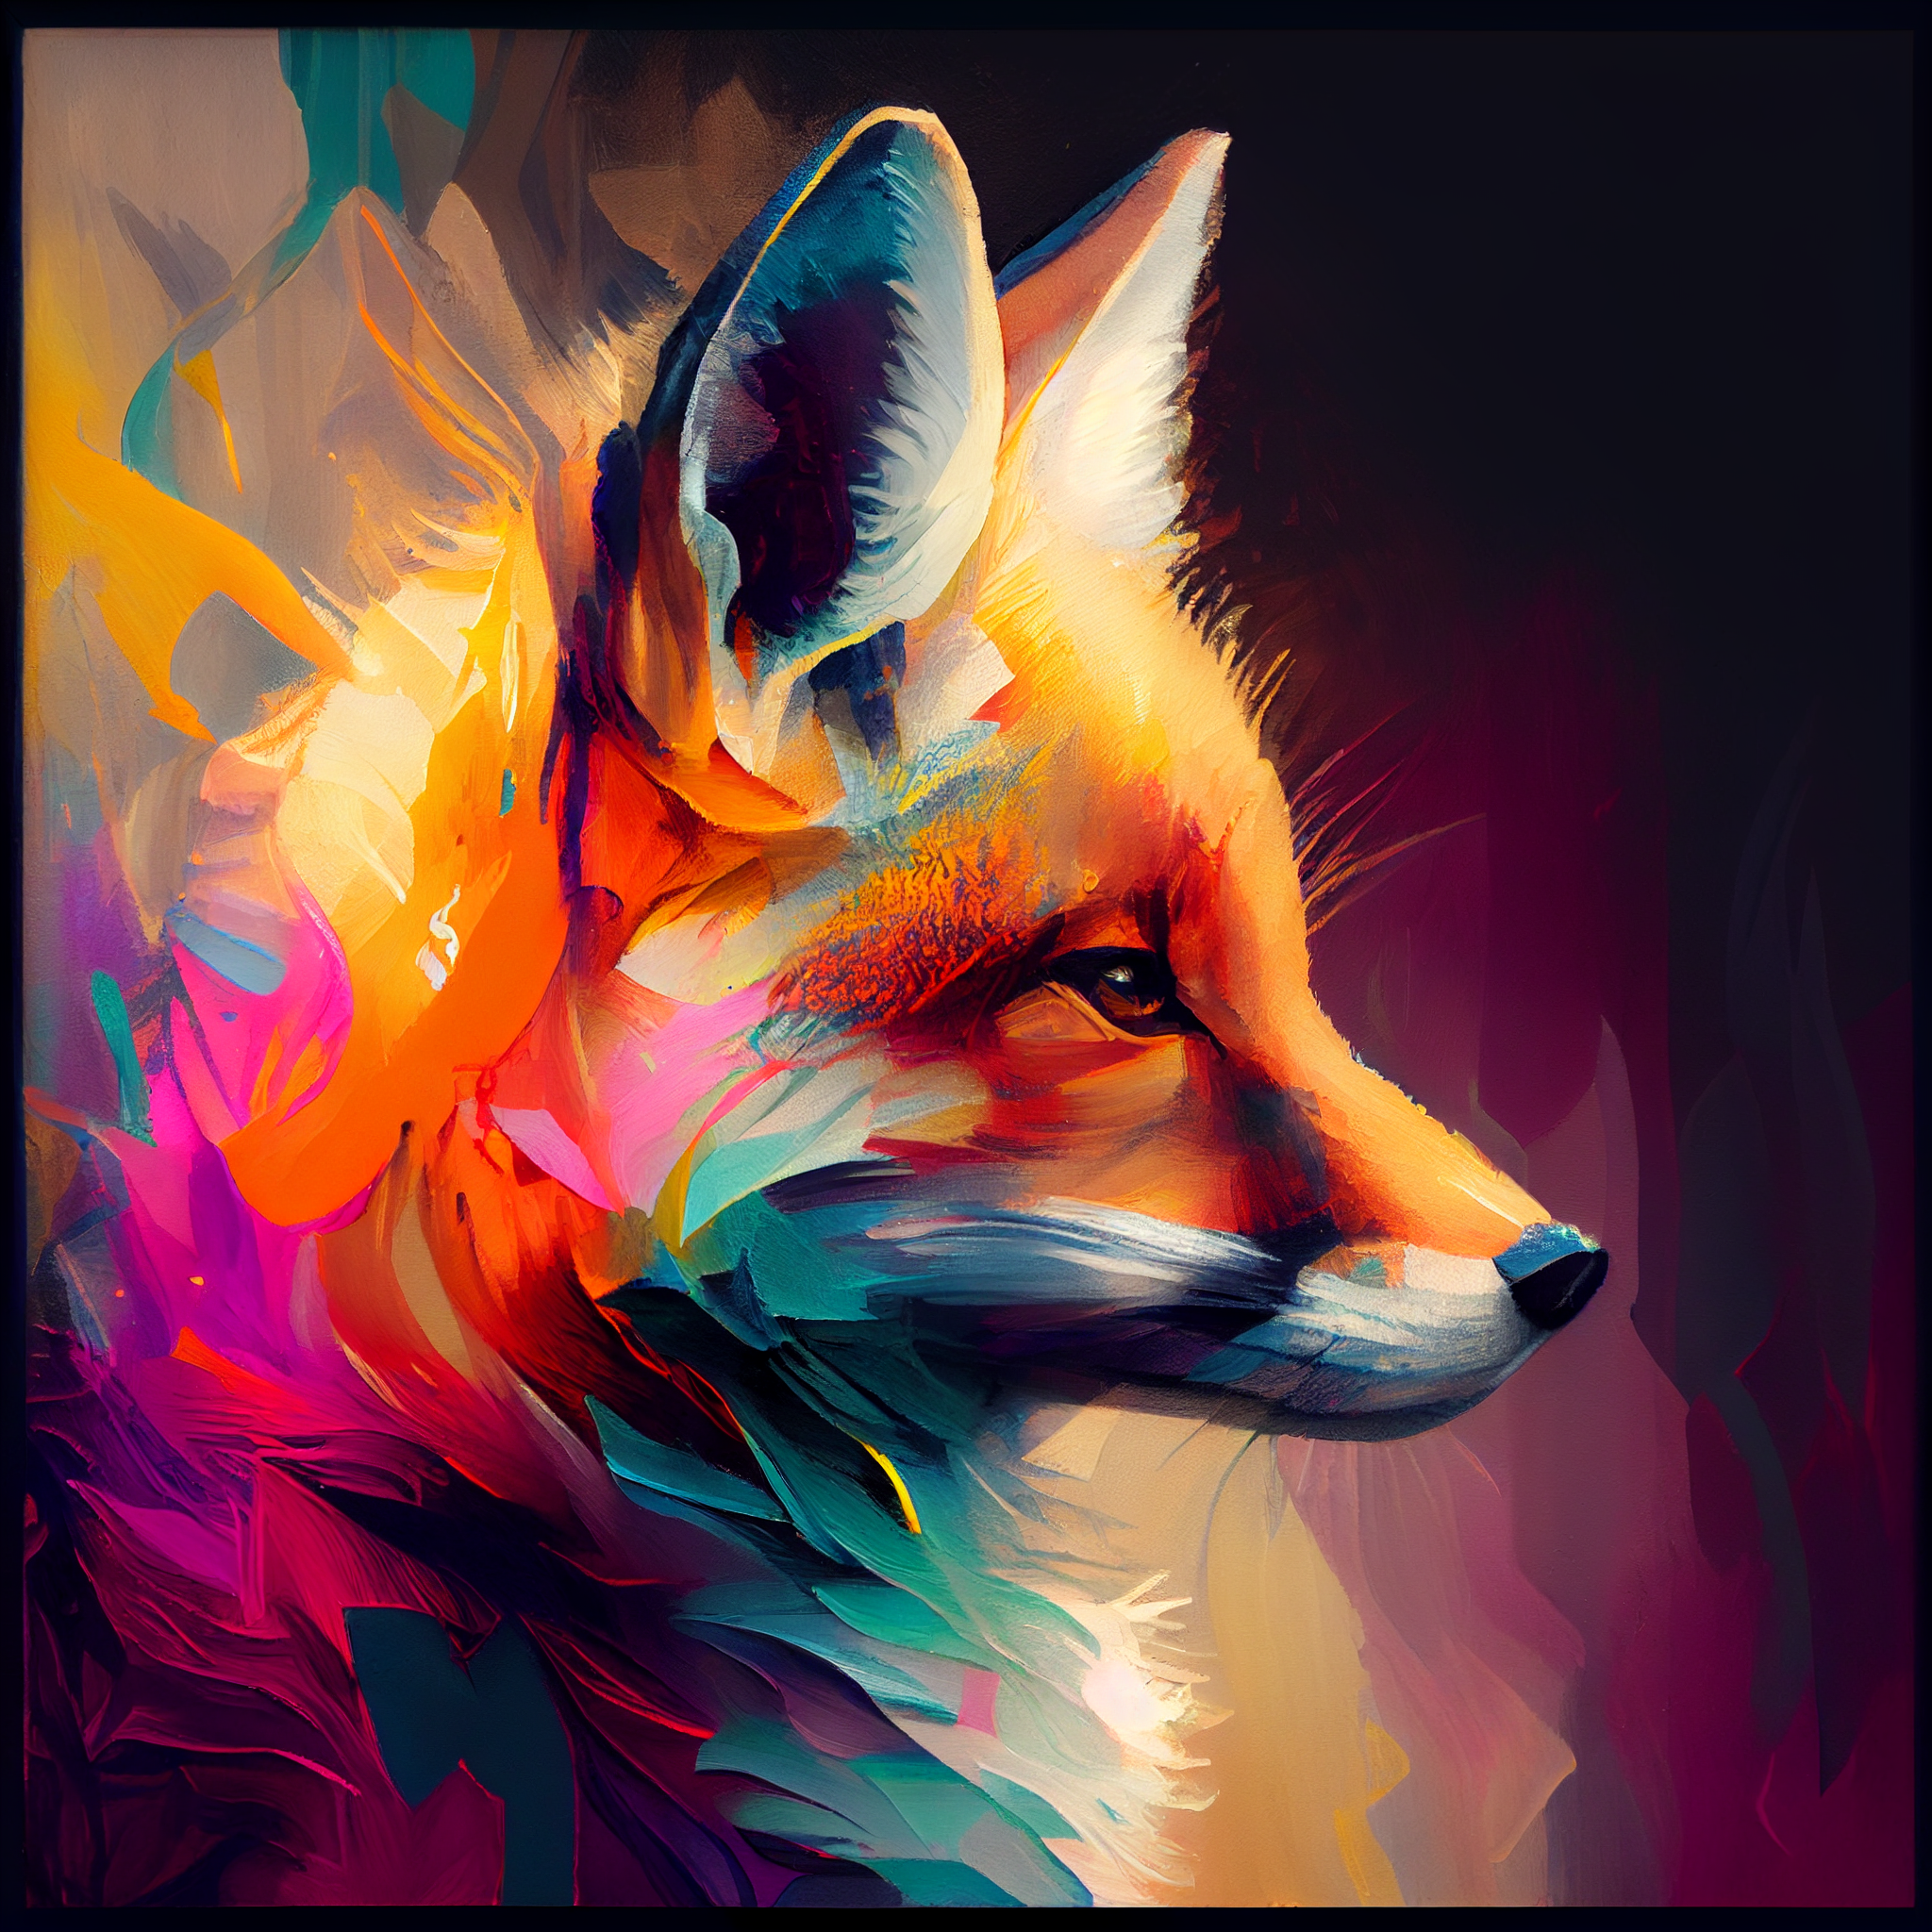 "Fox in Colors: Vibrant Painting Print of a Sideways-Looking Fox - Perfect as a Gift"